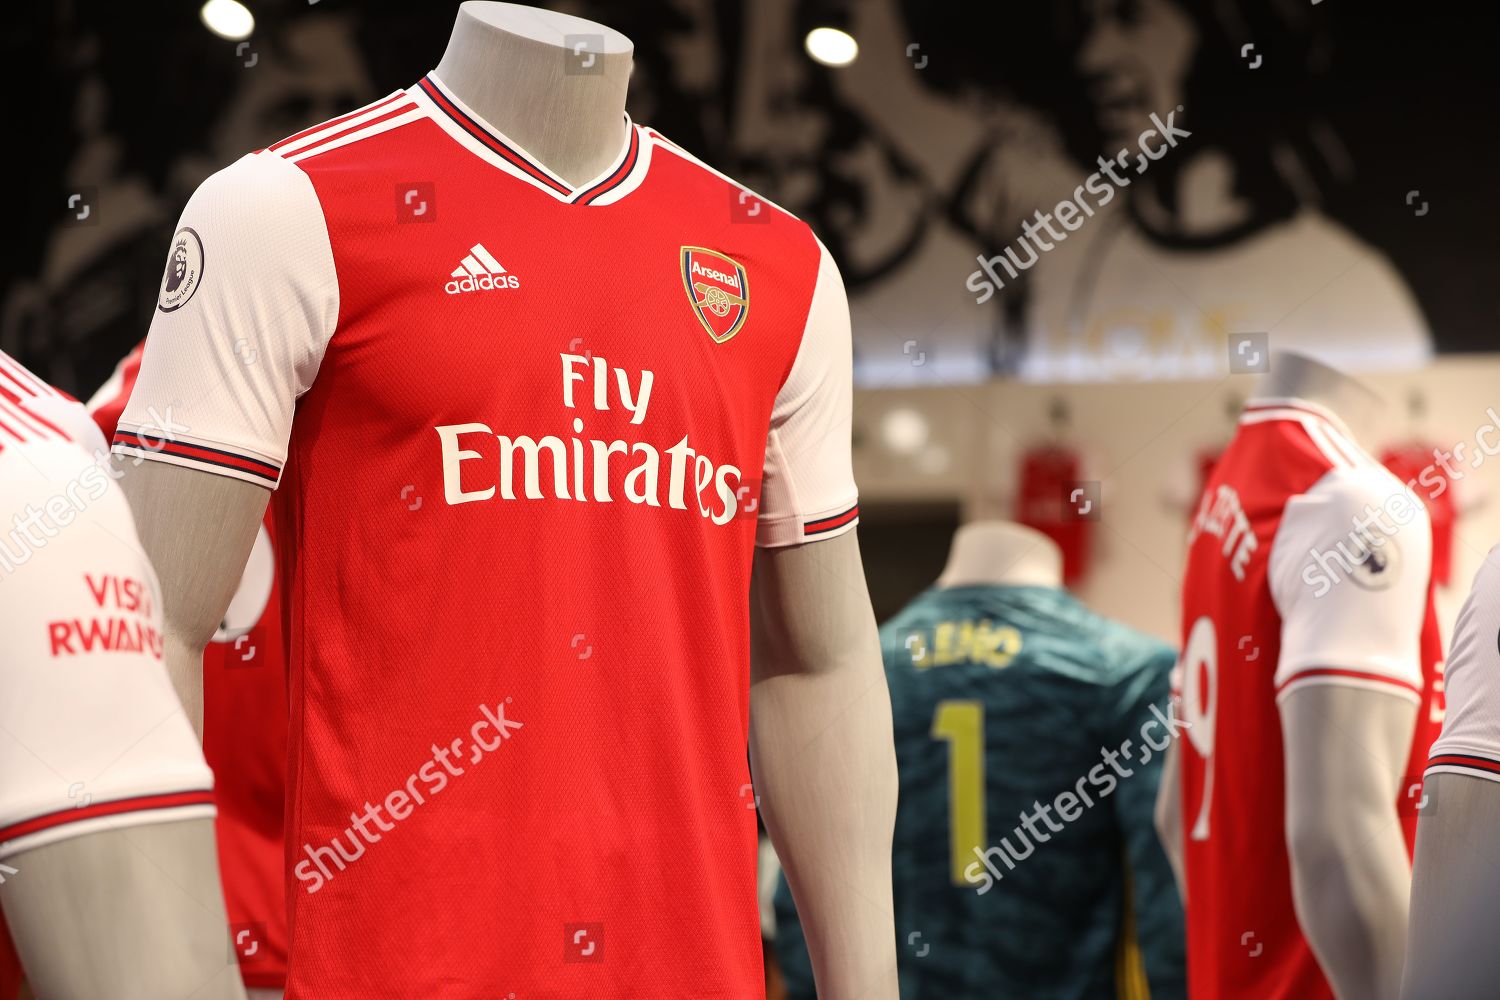 New Arsenal Home Kit On Display During Editorial Stock Photo Stock Image Shutterstock